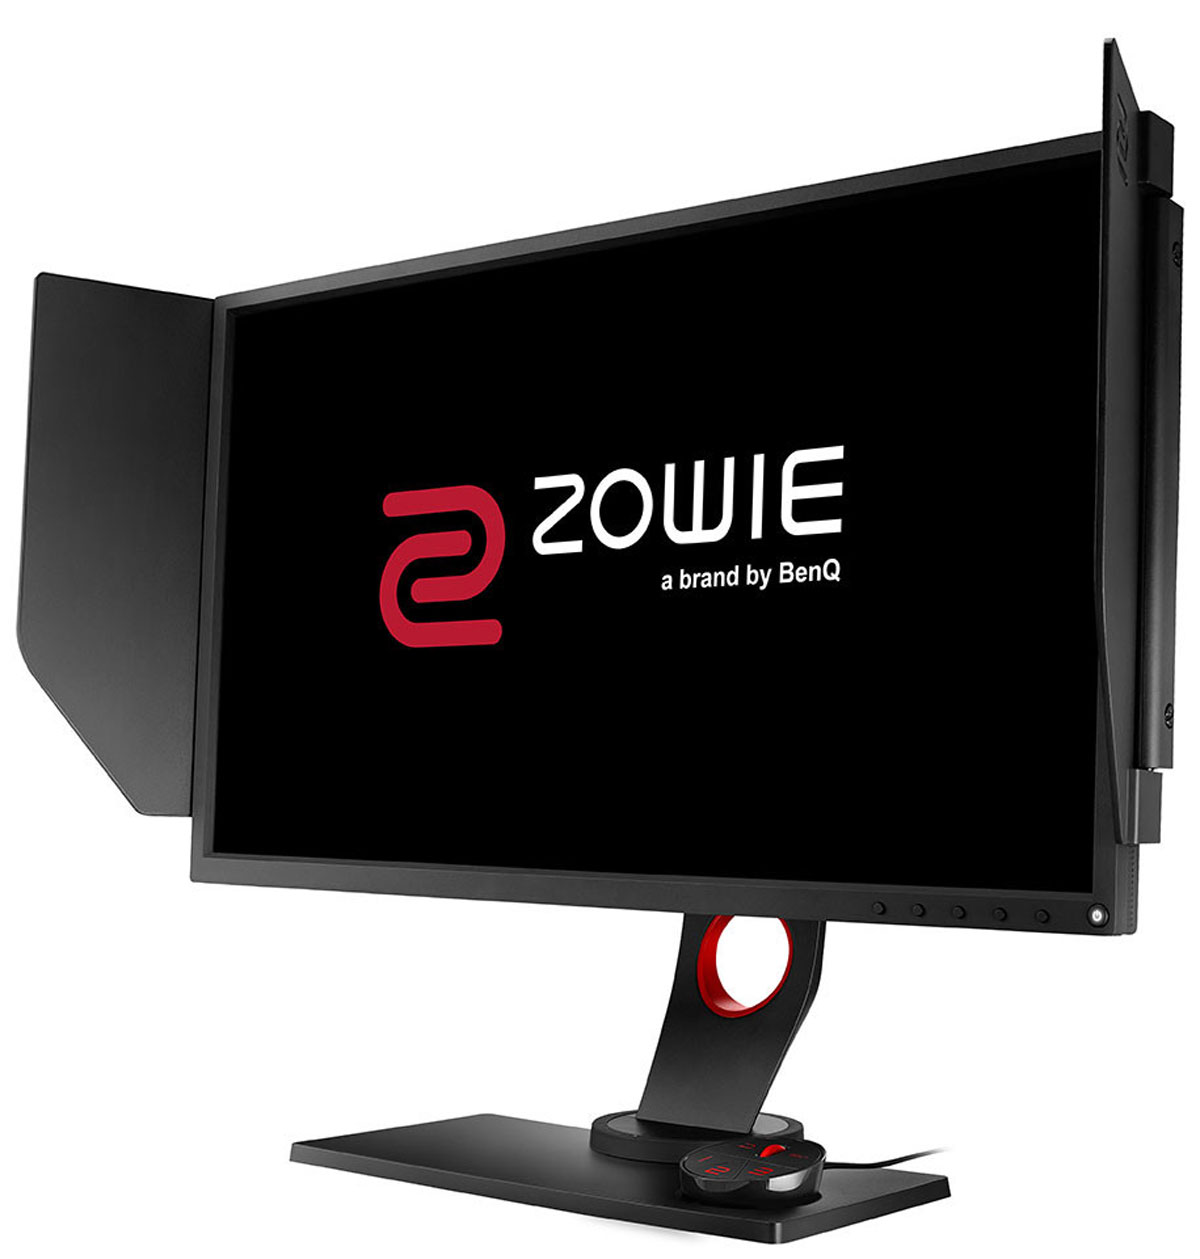 BENQ Announces The ZOWIE XL2540 240Hz Gaming Monitor